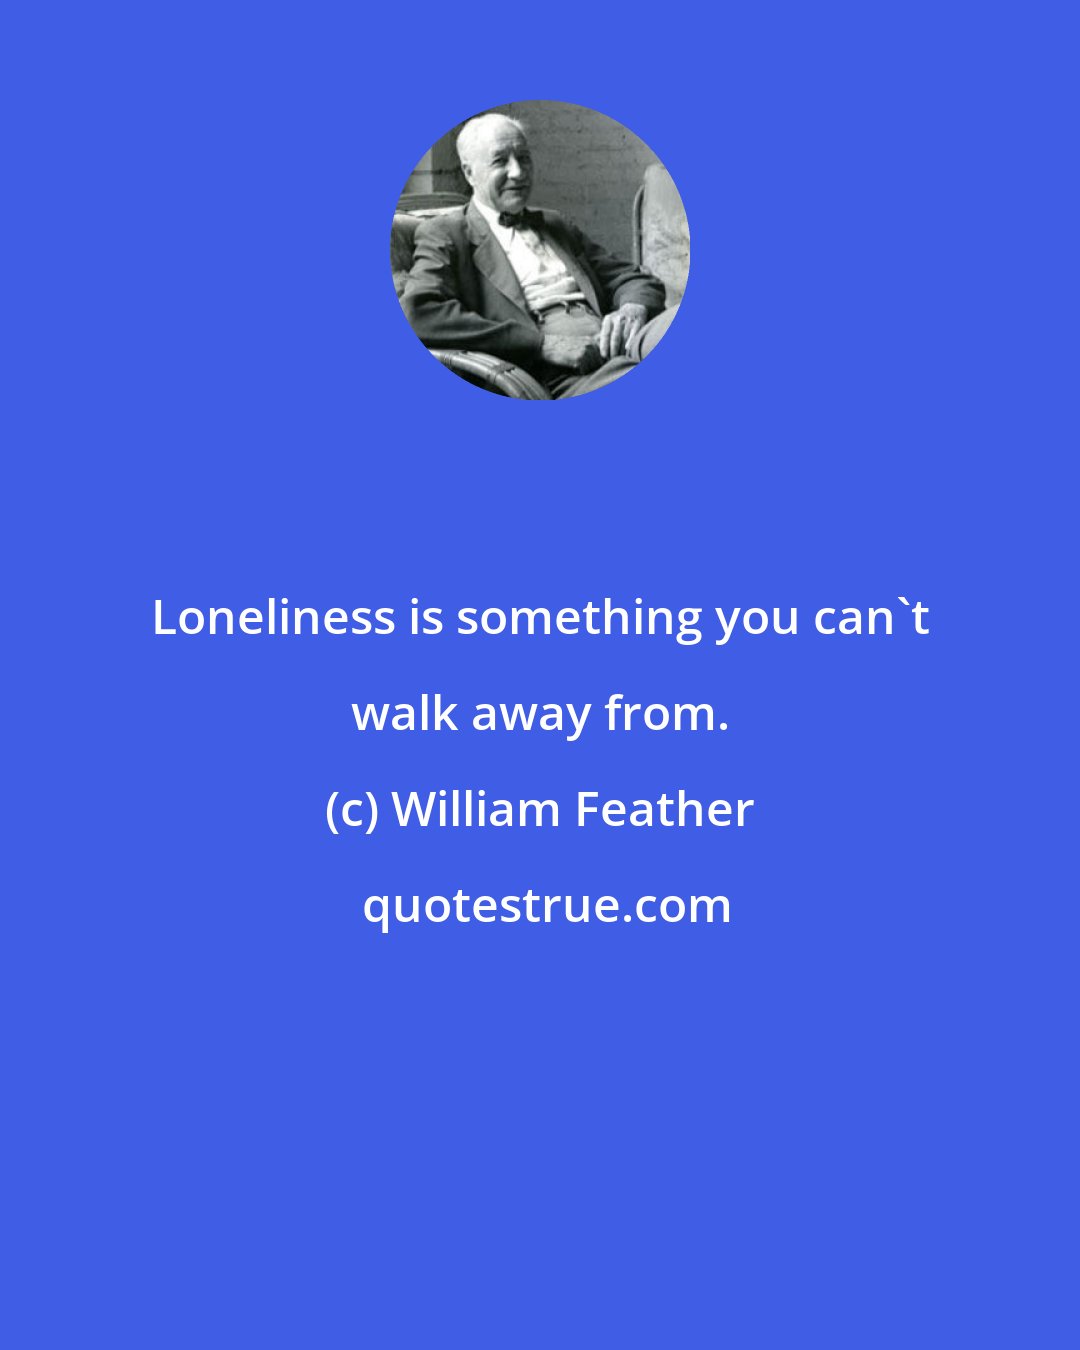 William Feather: Loneliness is something you can't walk away from.